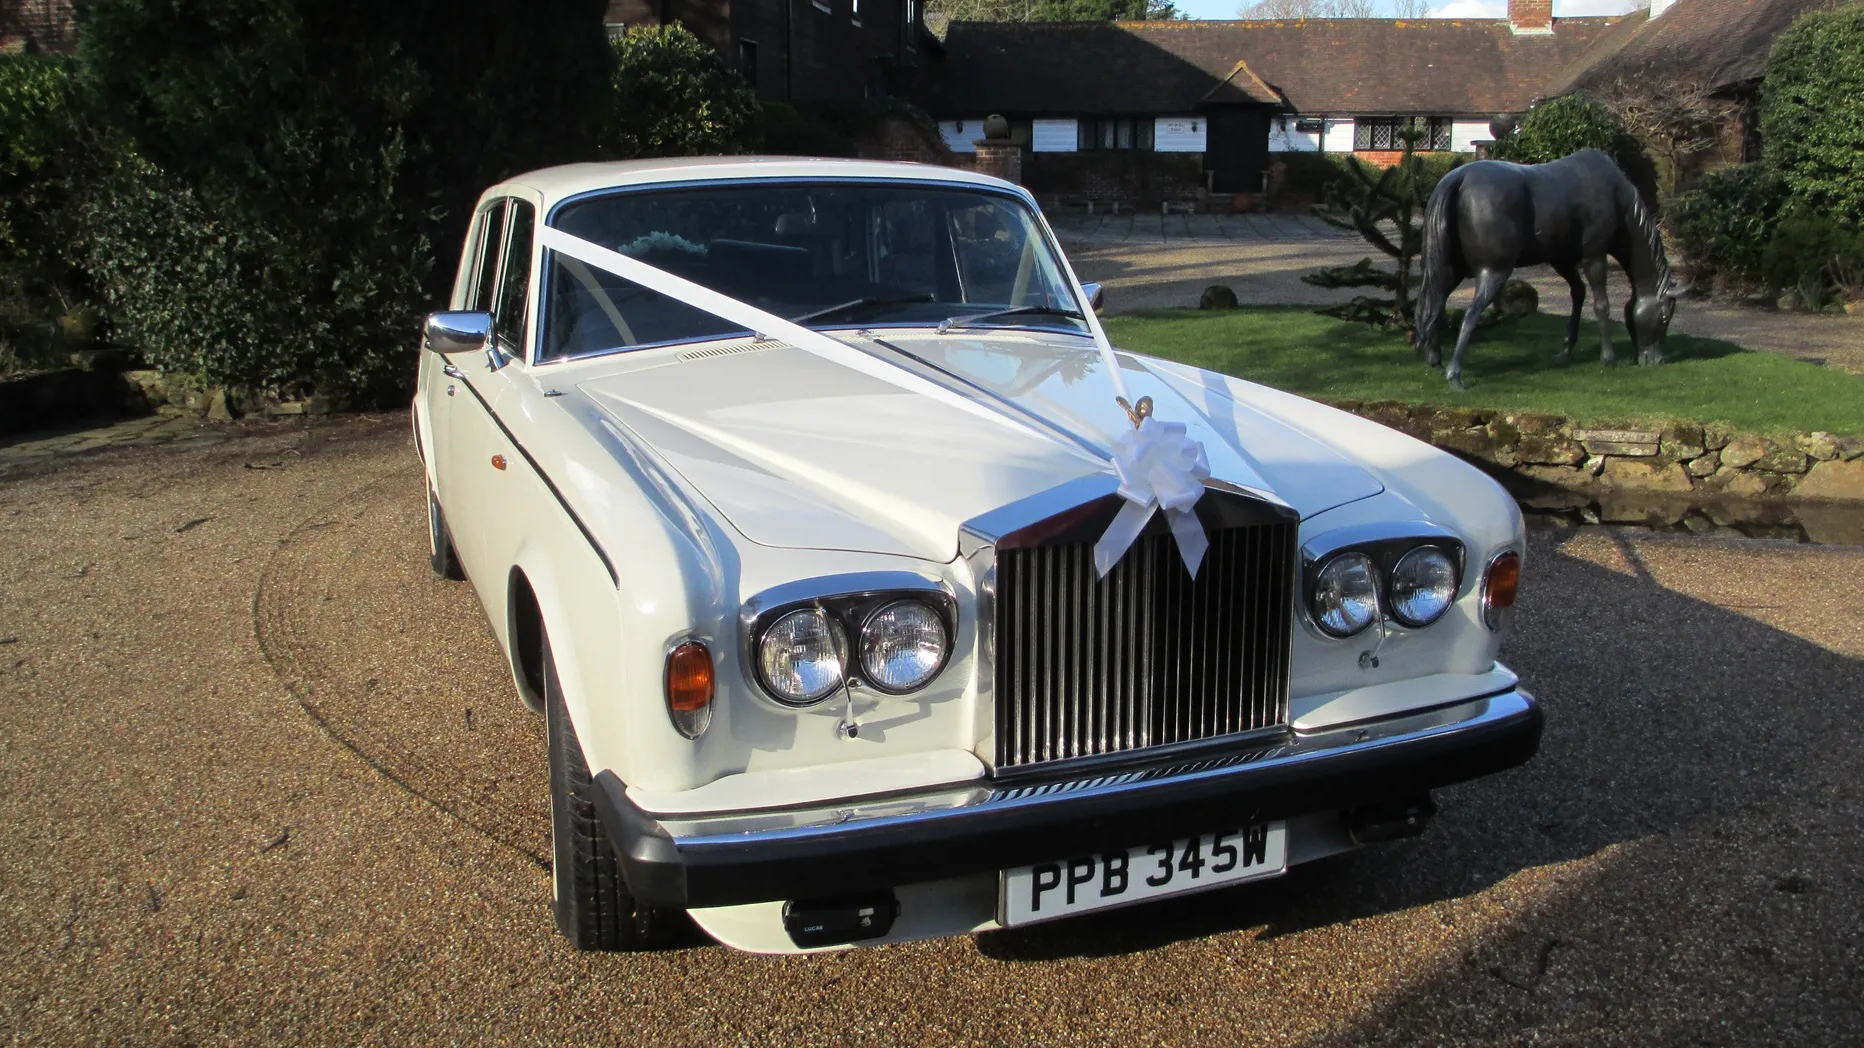 Classic Rolls- Royce Silver Shadown in white decorated with ribbons parked in front of a local Newquay wedding venue.